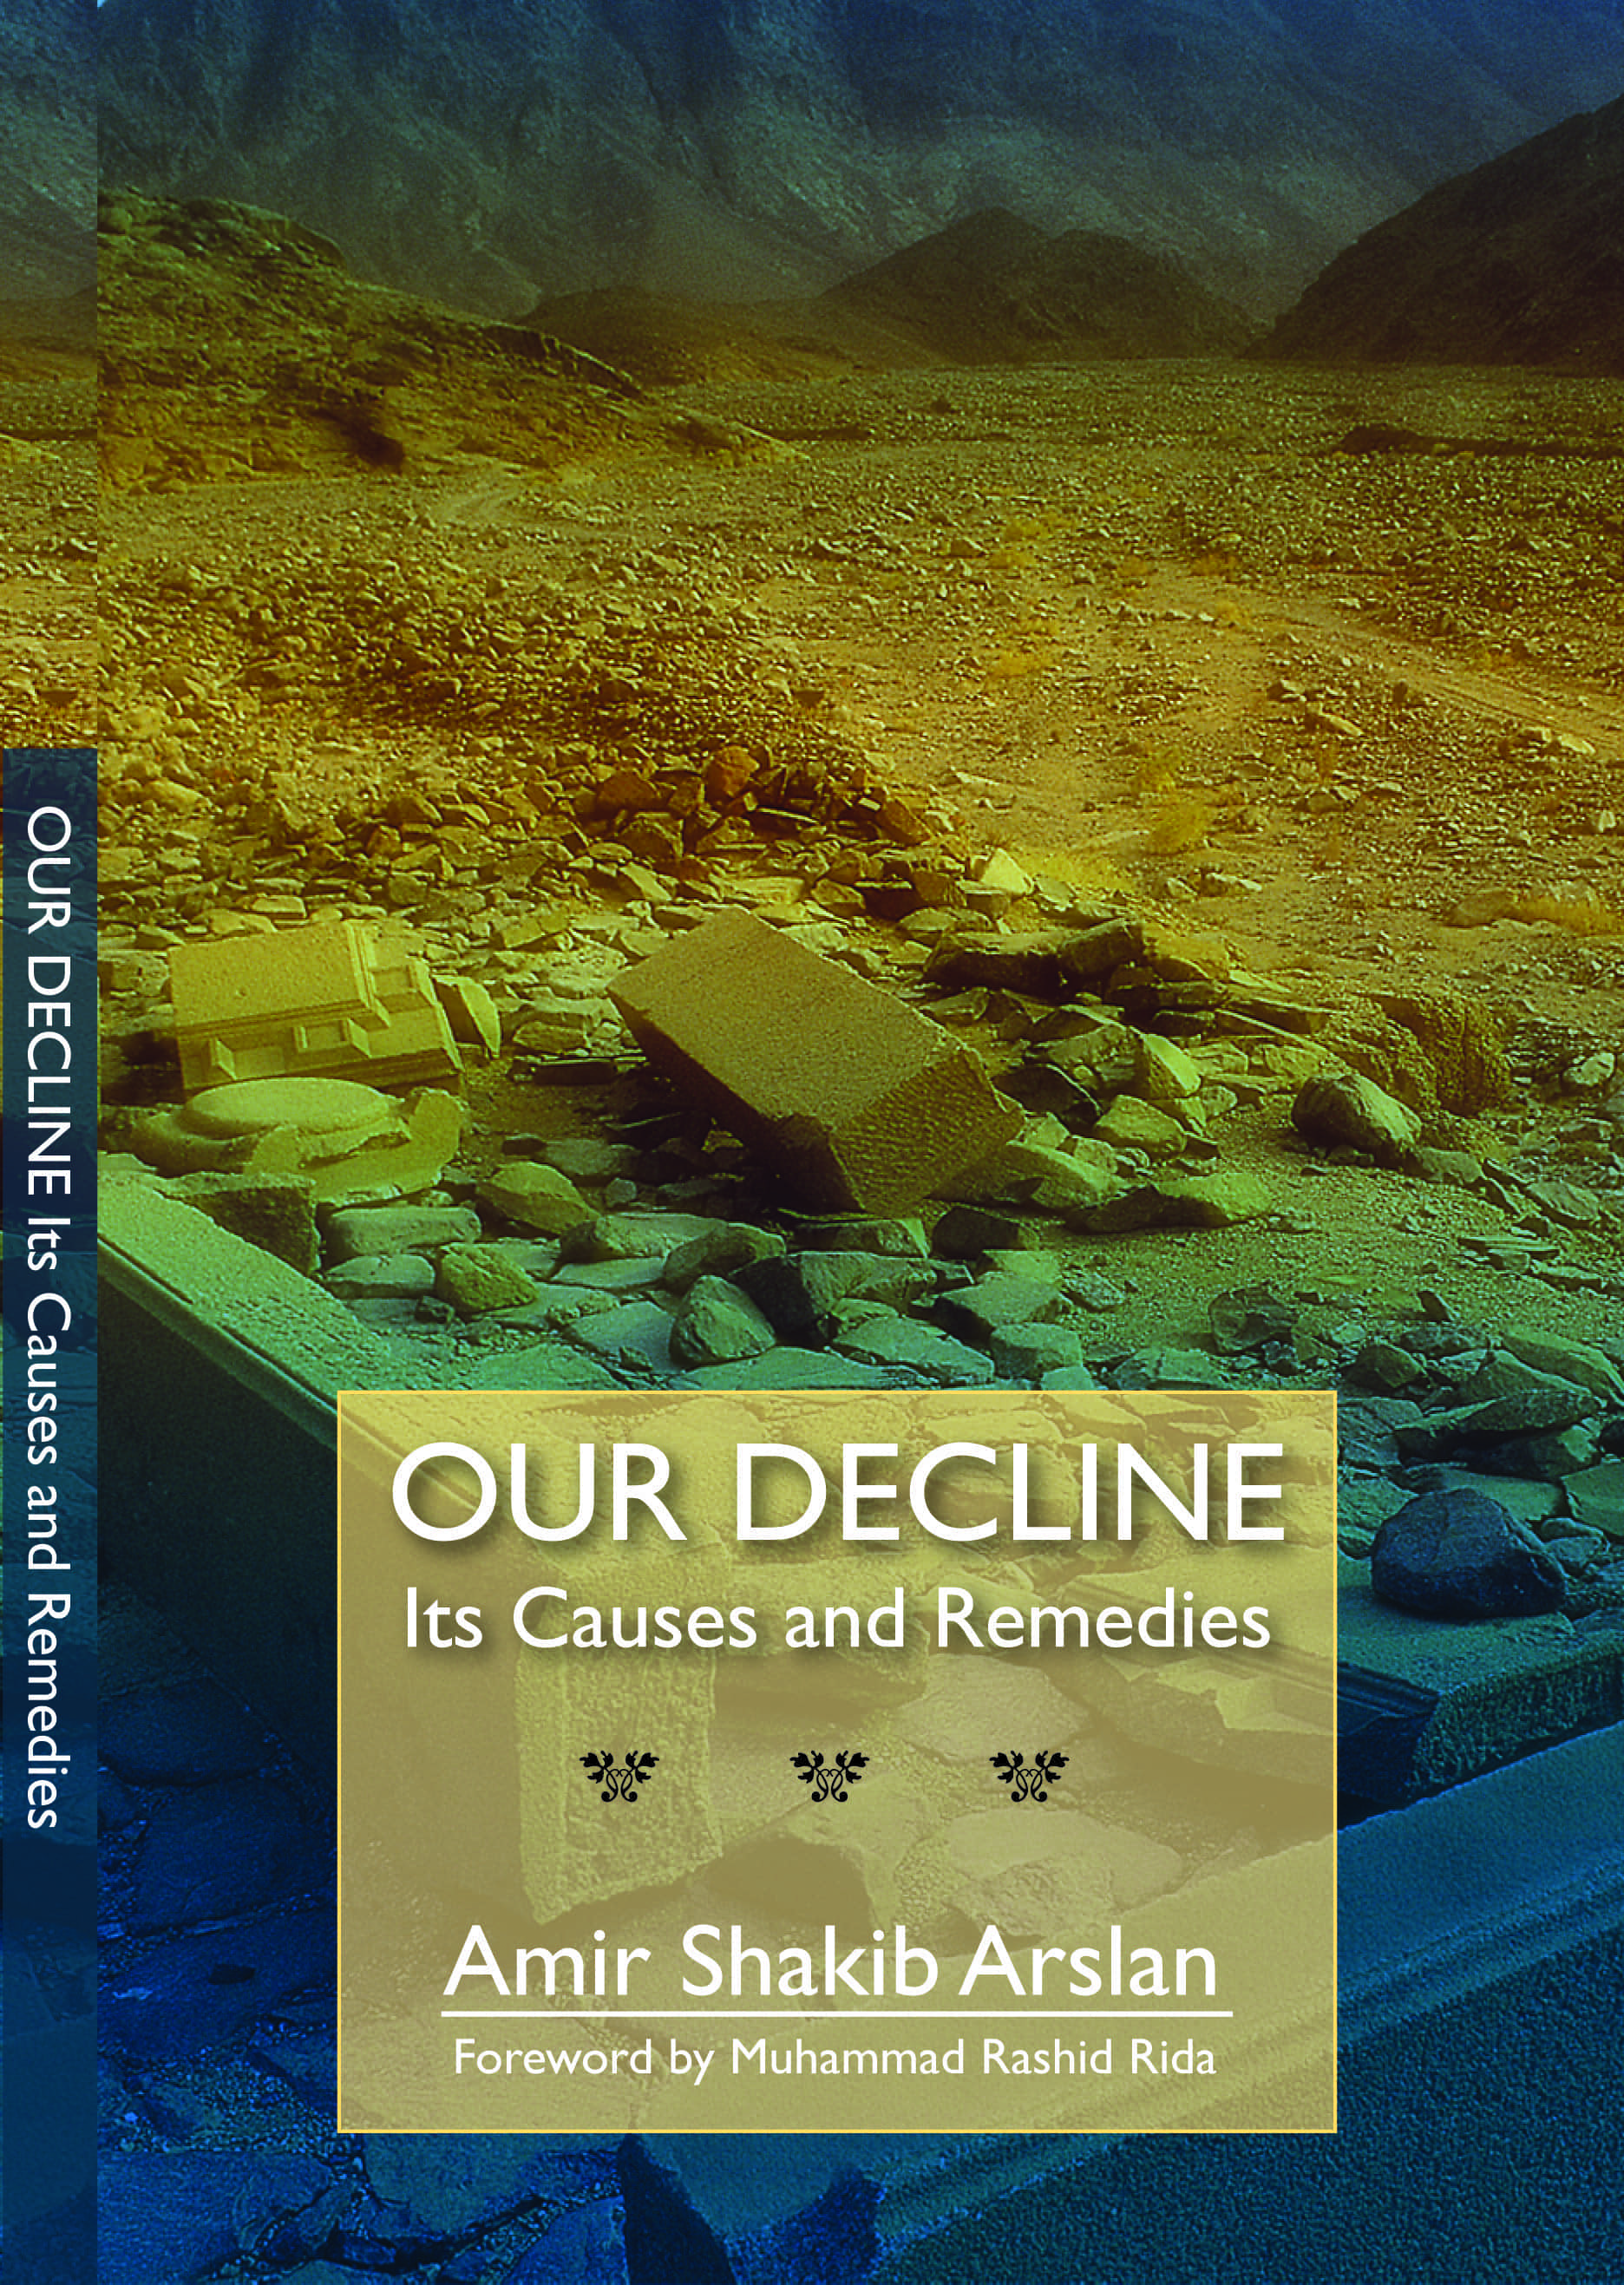 Our Decline: Its Causes and Remedies